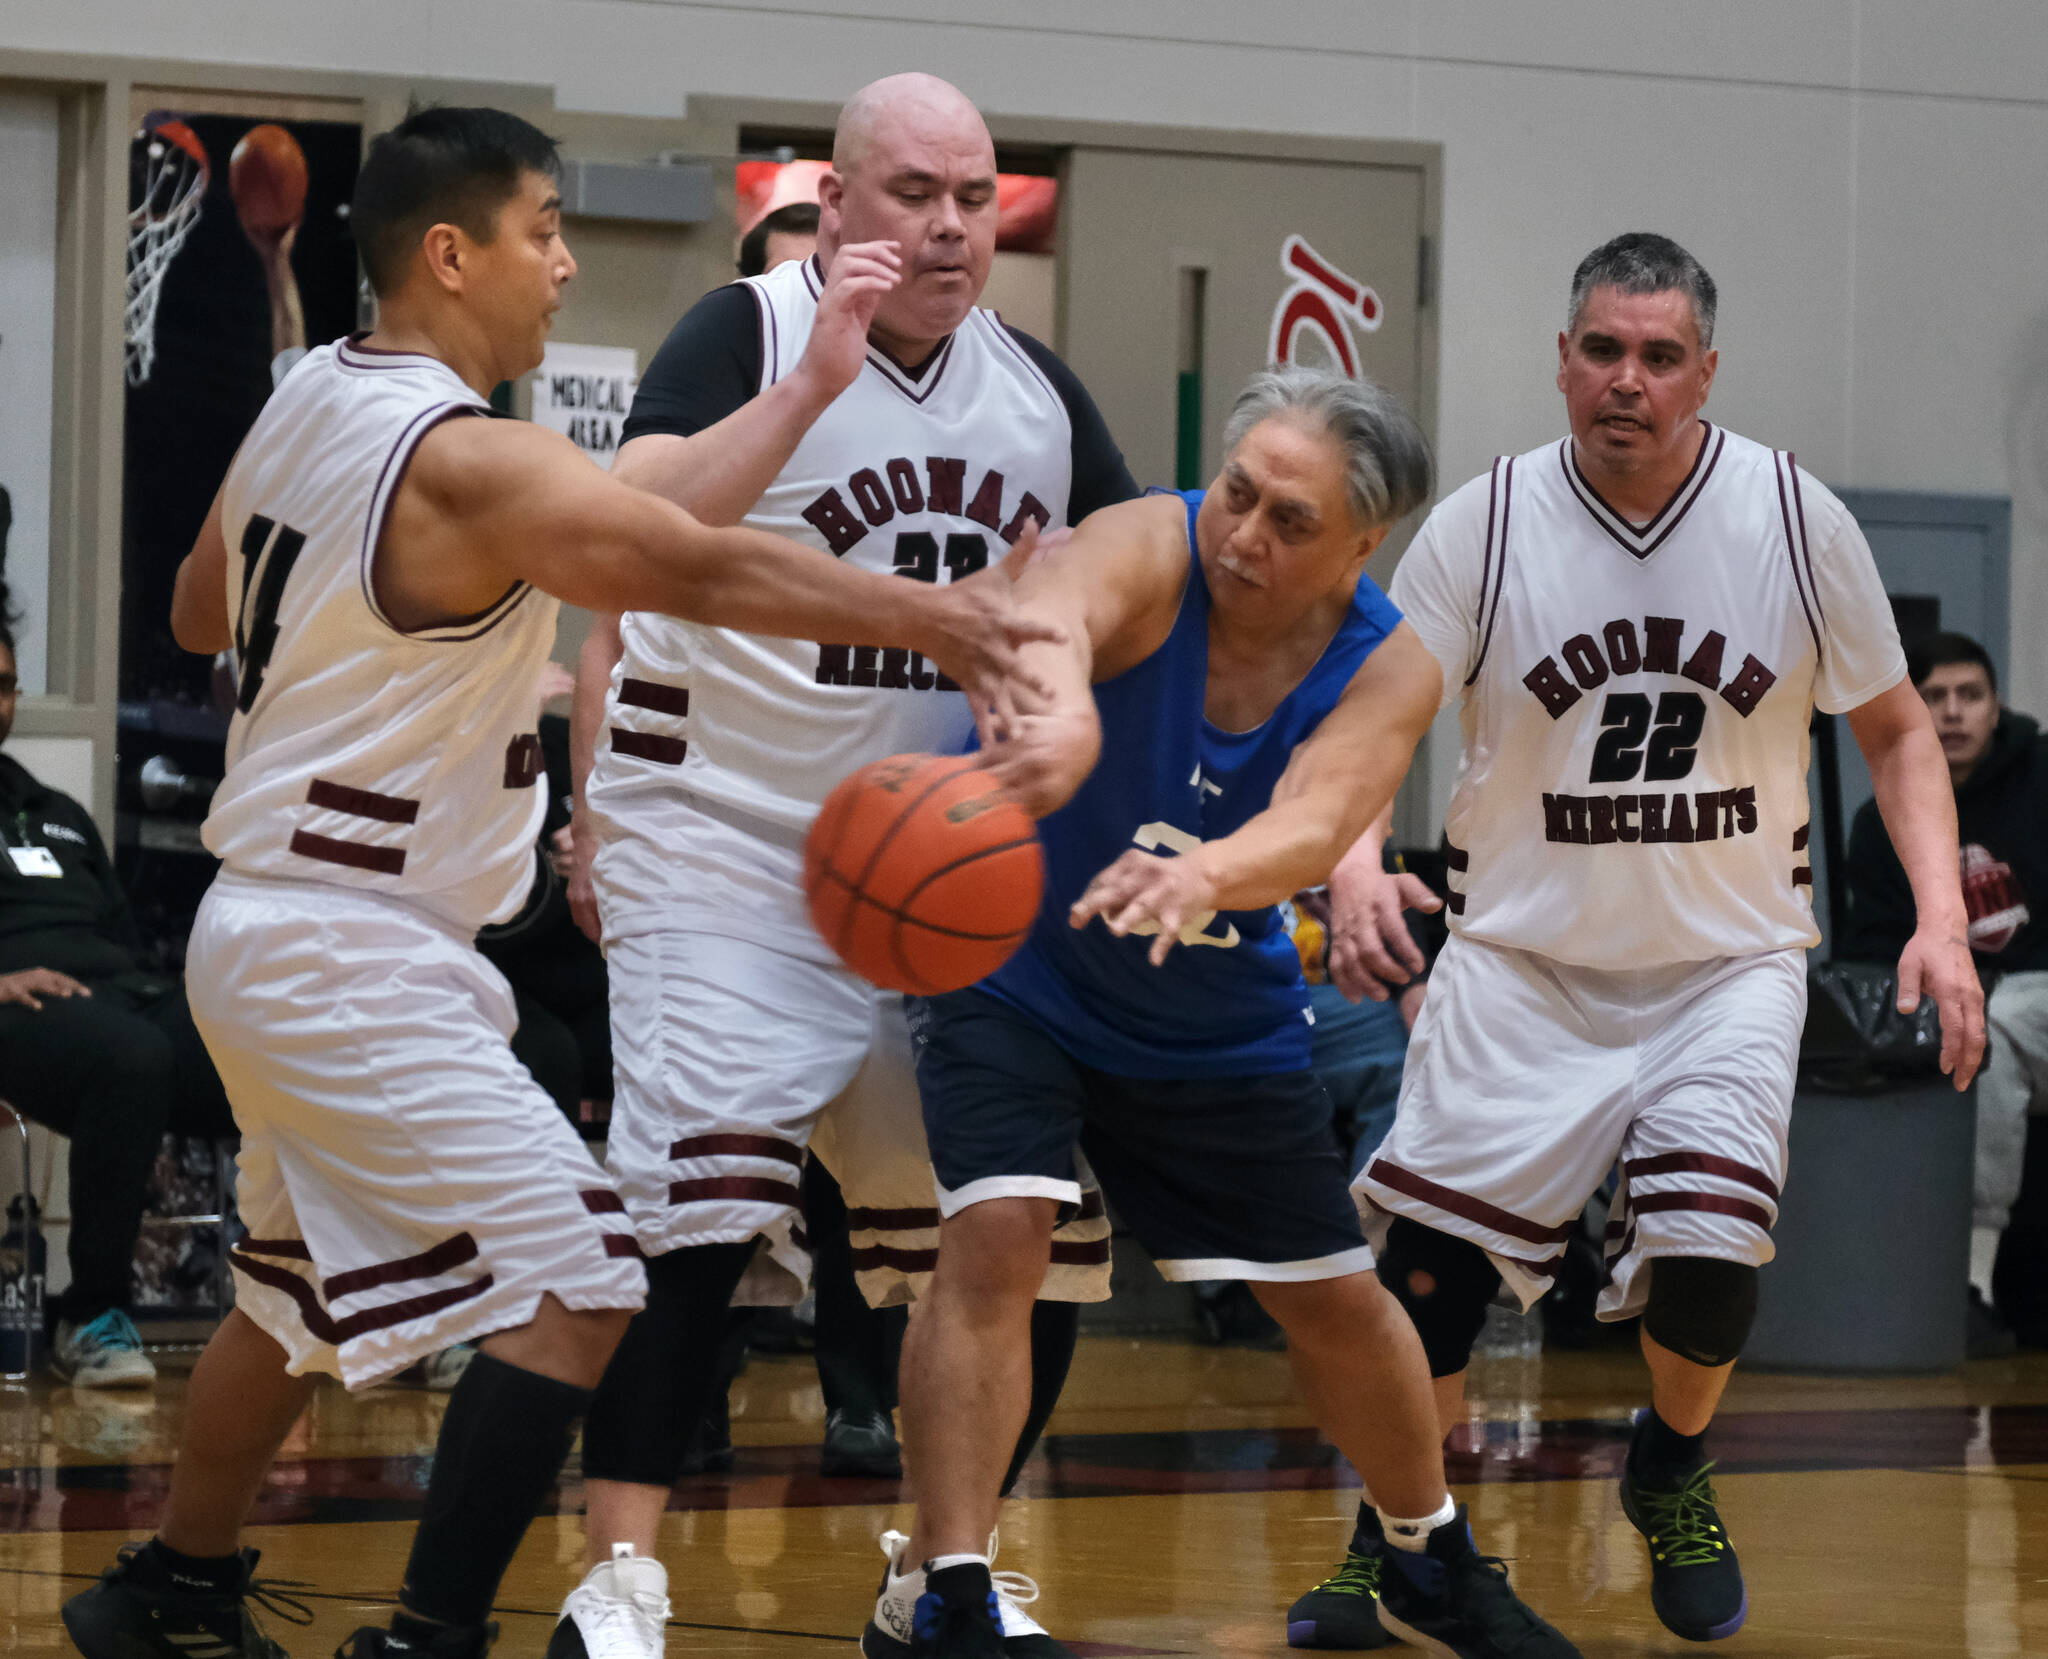 Hoonah’s Joe Cornell (14), Andy Gray (23) and Albert Hinchman (22) defend Kake’s Ray Cornell (30) during Masters Bracket action at the Juneau Lions Club 74th Annual Gold Medal Basketball Tournament, Sunday, March 19, at the Juneau-Douglas High School: Yadaa.at Kalé gymnasium. (Klas Stolpe / For the Juneau Empire)